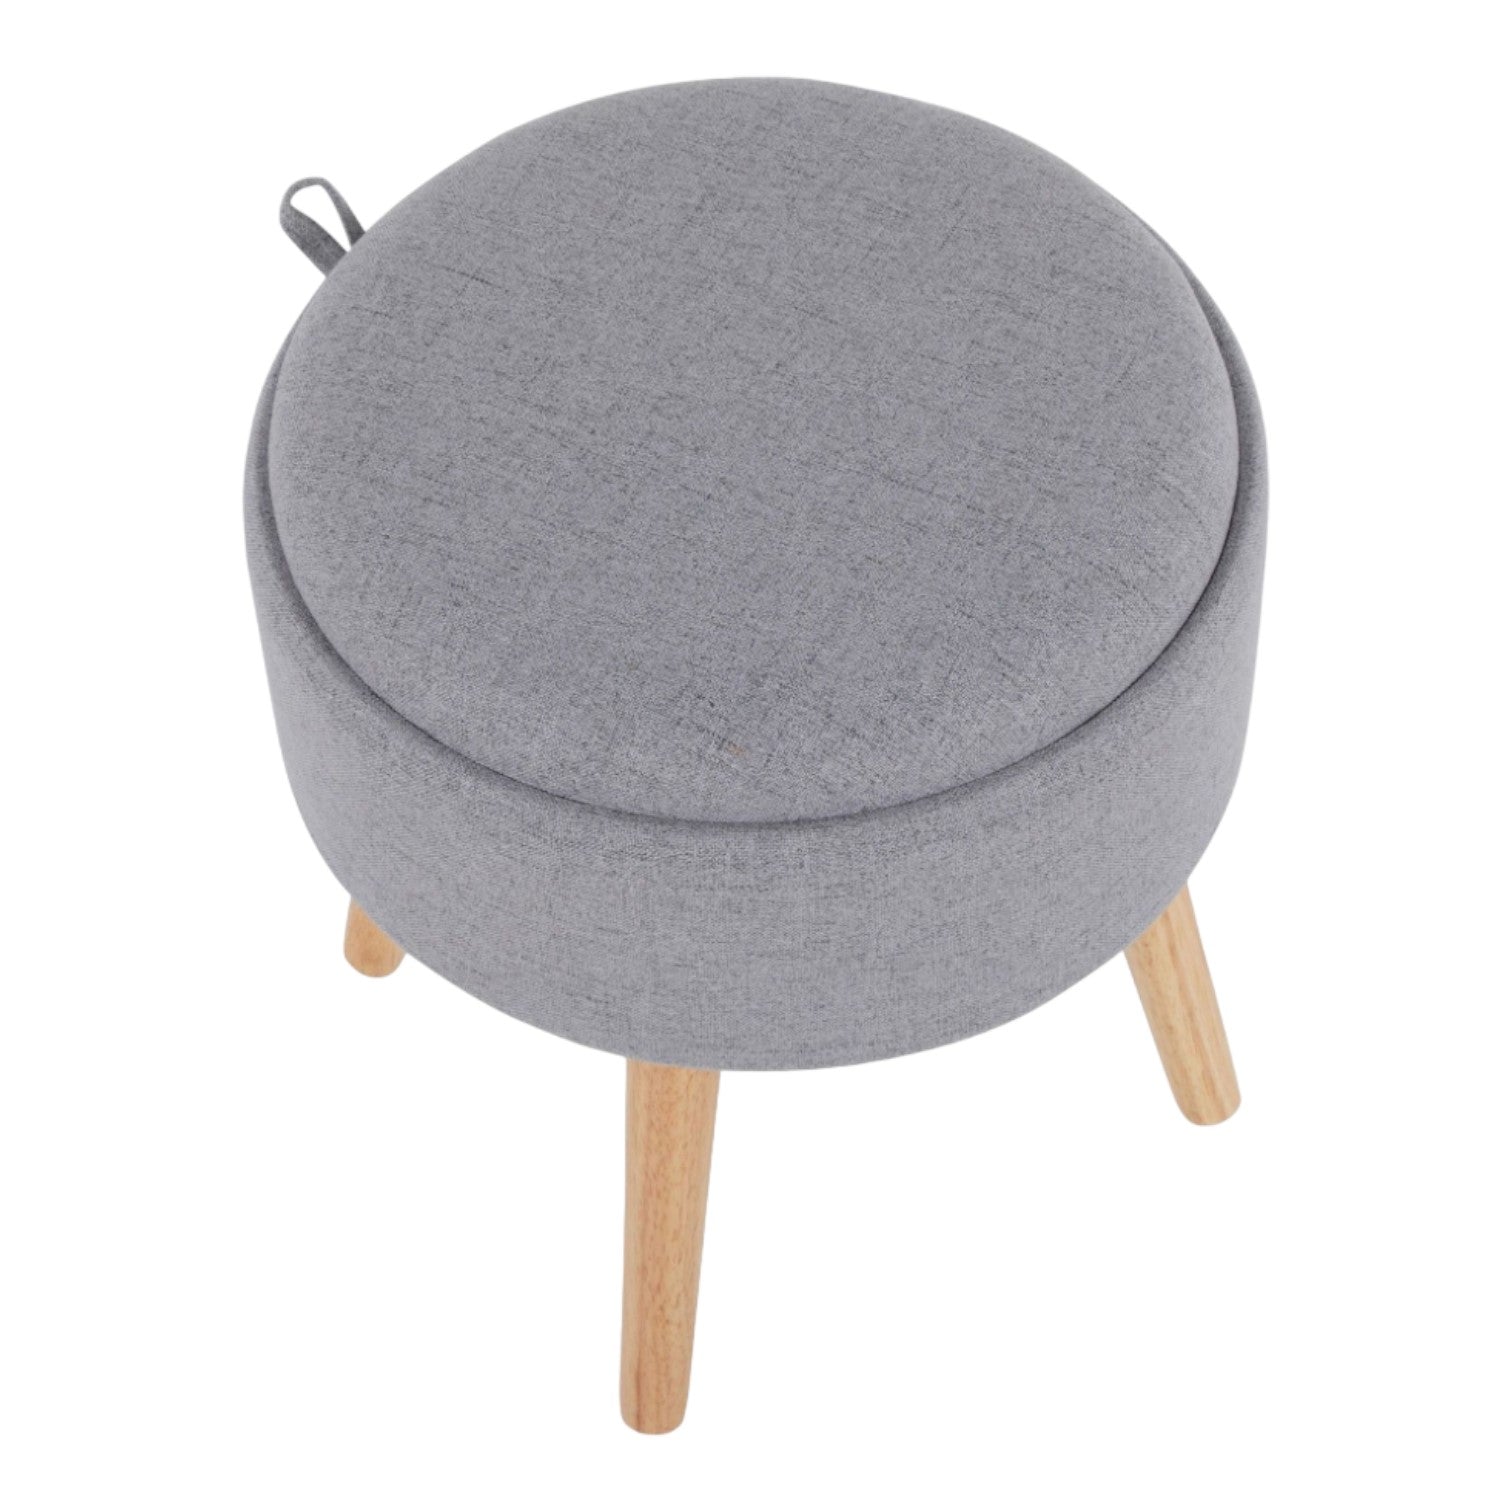 Picture of Trent Stool Natural Wood-Grey